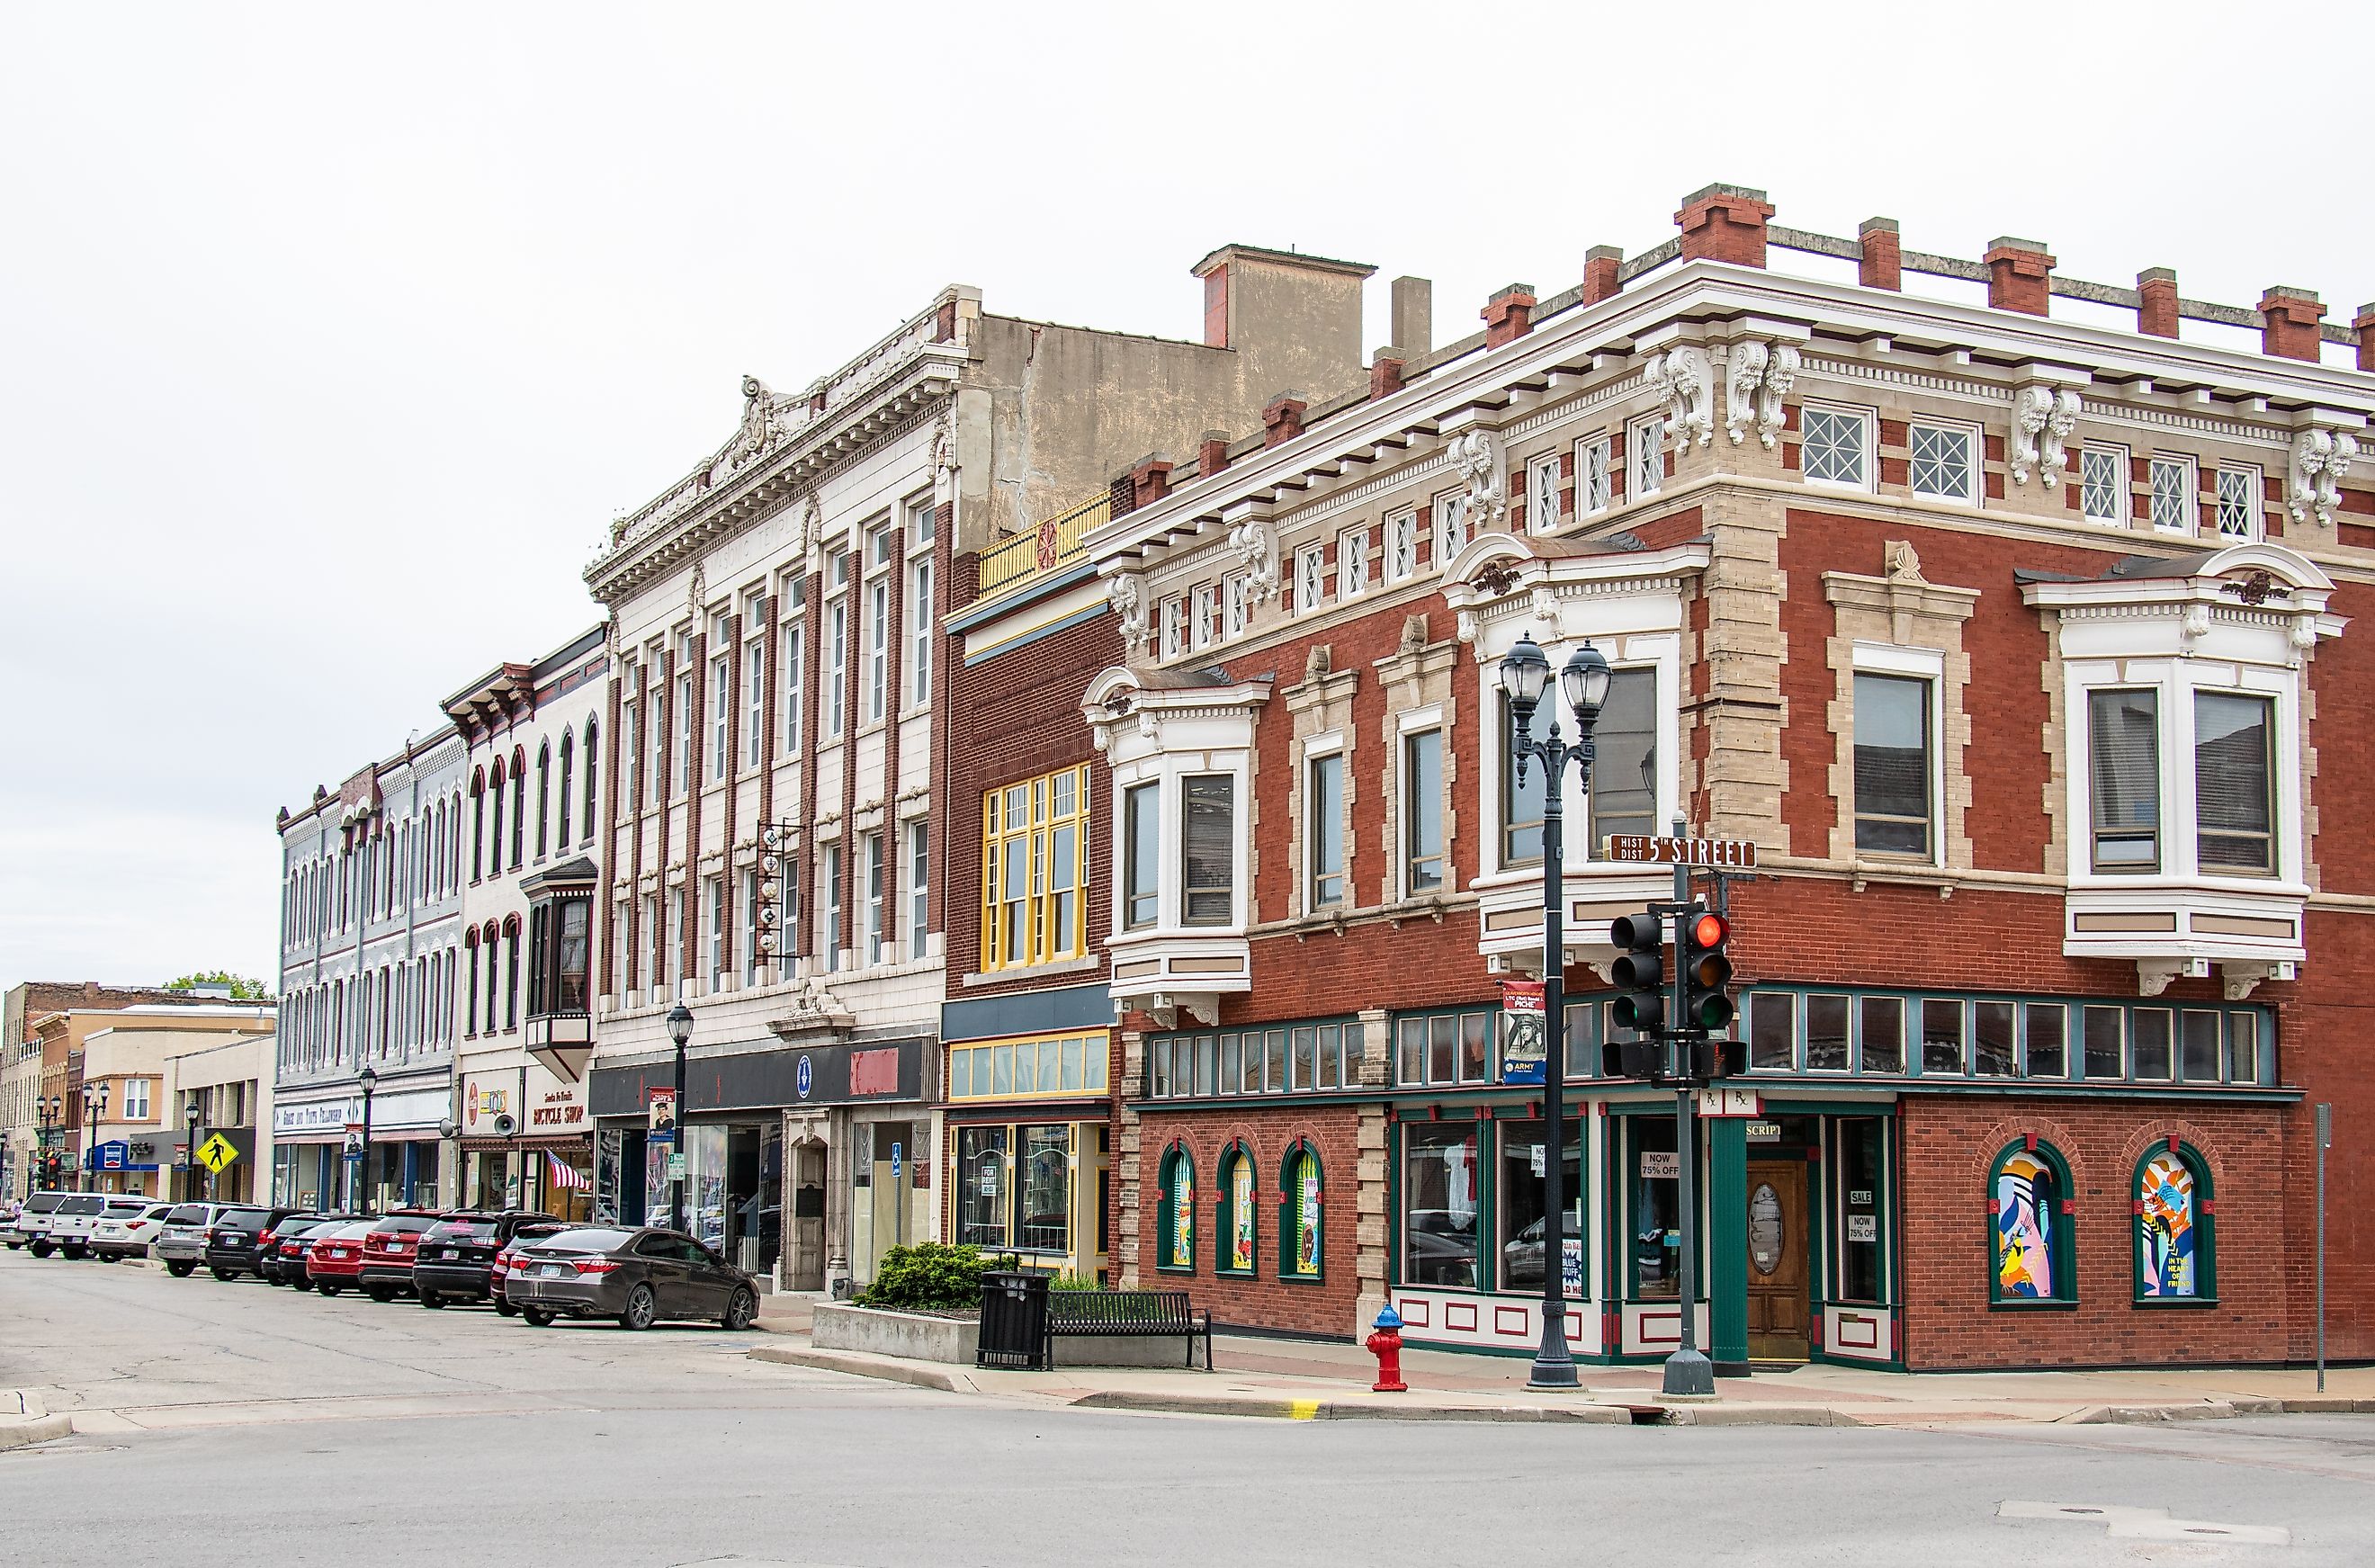 Buildings along the historic downtown area of Leavenworth, Kansas. Editorial credit: Jon M. Ripperger / Shutterstock.com